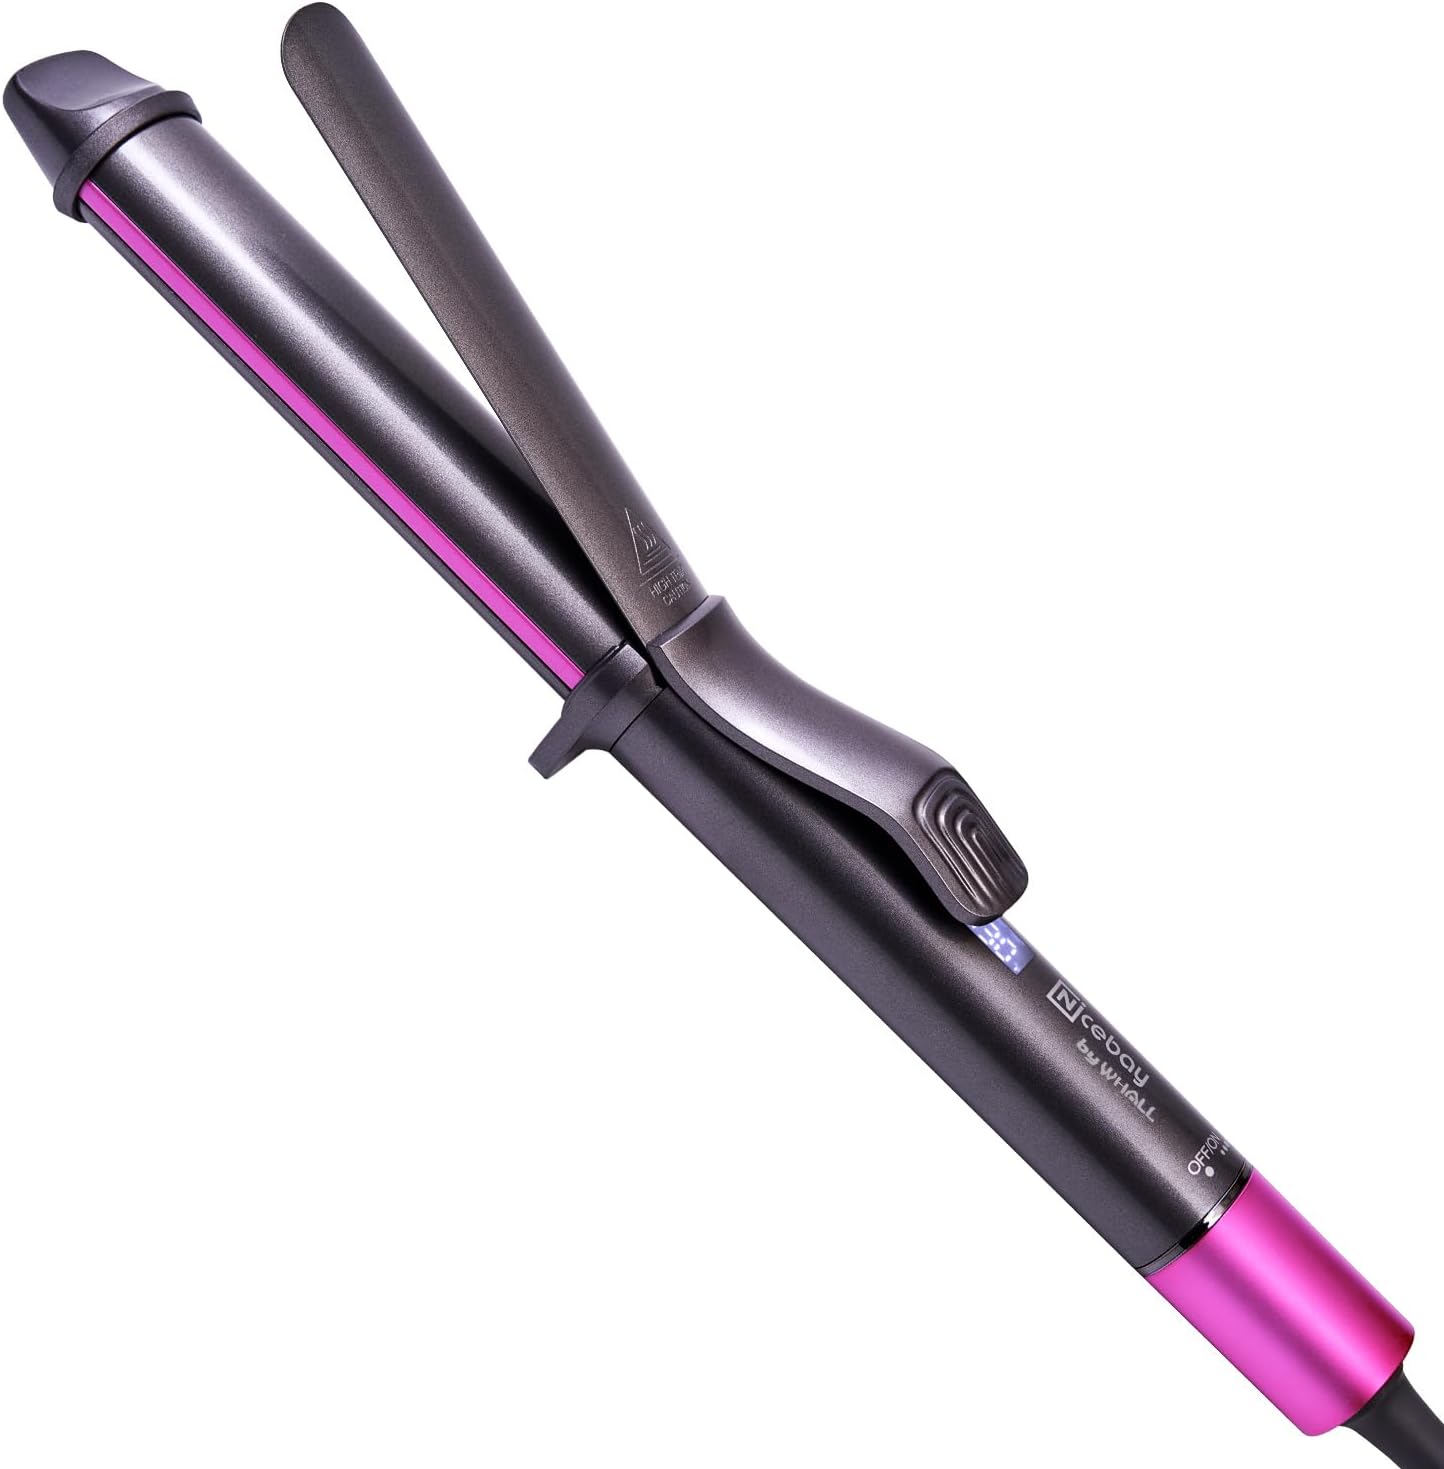 NICEBAY® DW-6010/A Curling Iron,1 1/4 Inch Hair Curling Iron with Ceramic Coating, Professional Curling Wand, Fast Heating up to 430°F, Temperature LED Display, Wide Voltage for Worldwide, 60 Mins Auto Off